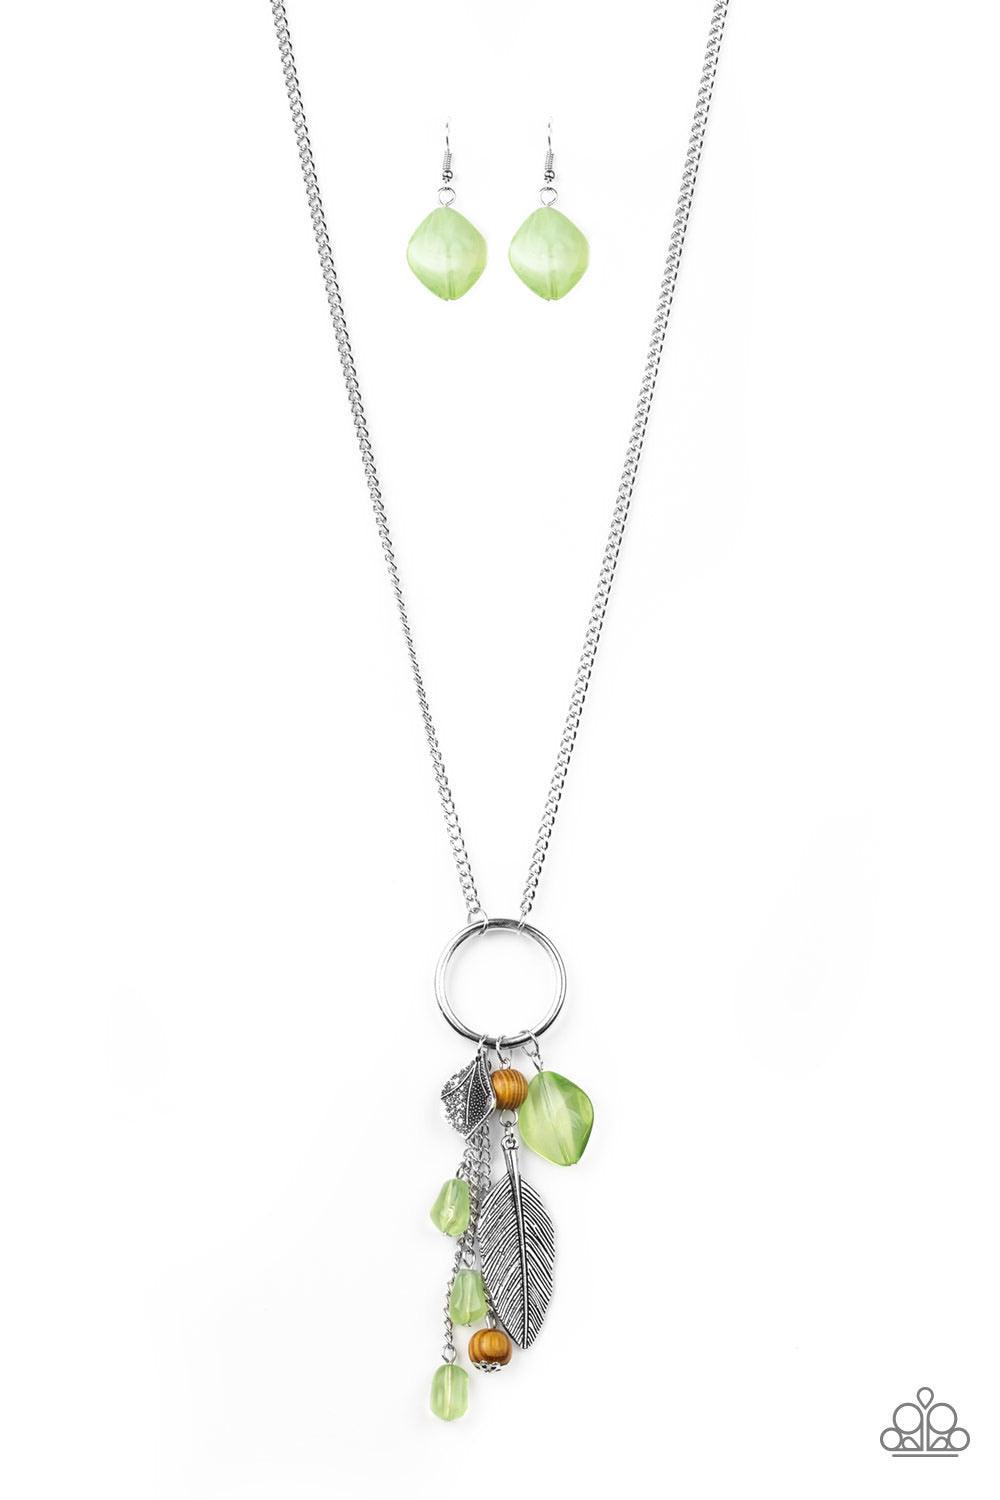 Paparazzi Accessories Sky High Style - Green Infused with shimmery silver chains, a collection of earthy brown beads, cloudy green beads, and glistening silver feather charms swing from the bottom of a bold silver hoop. The whimsical tassel attaches to a